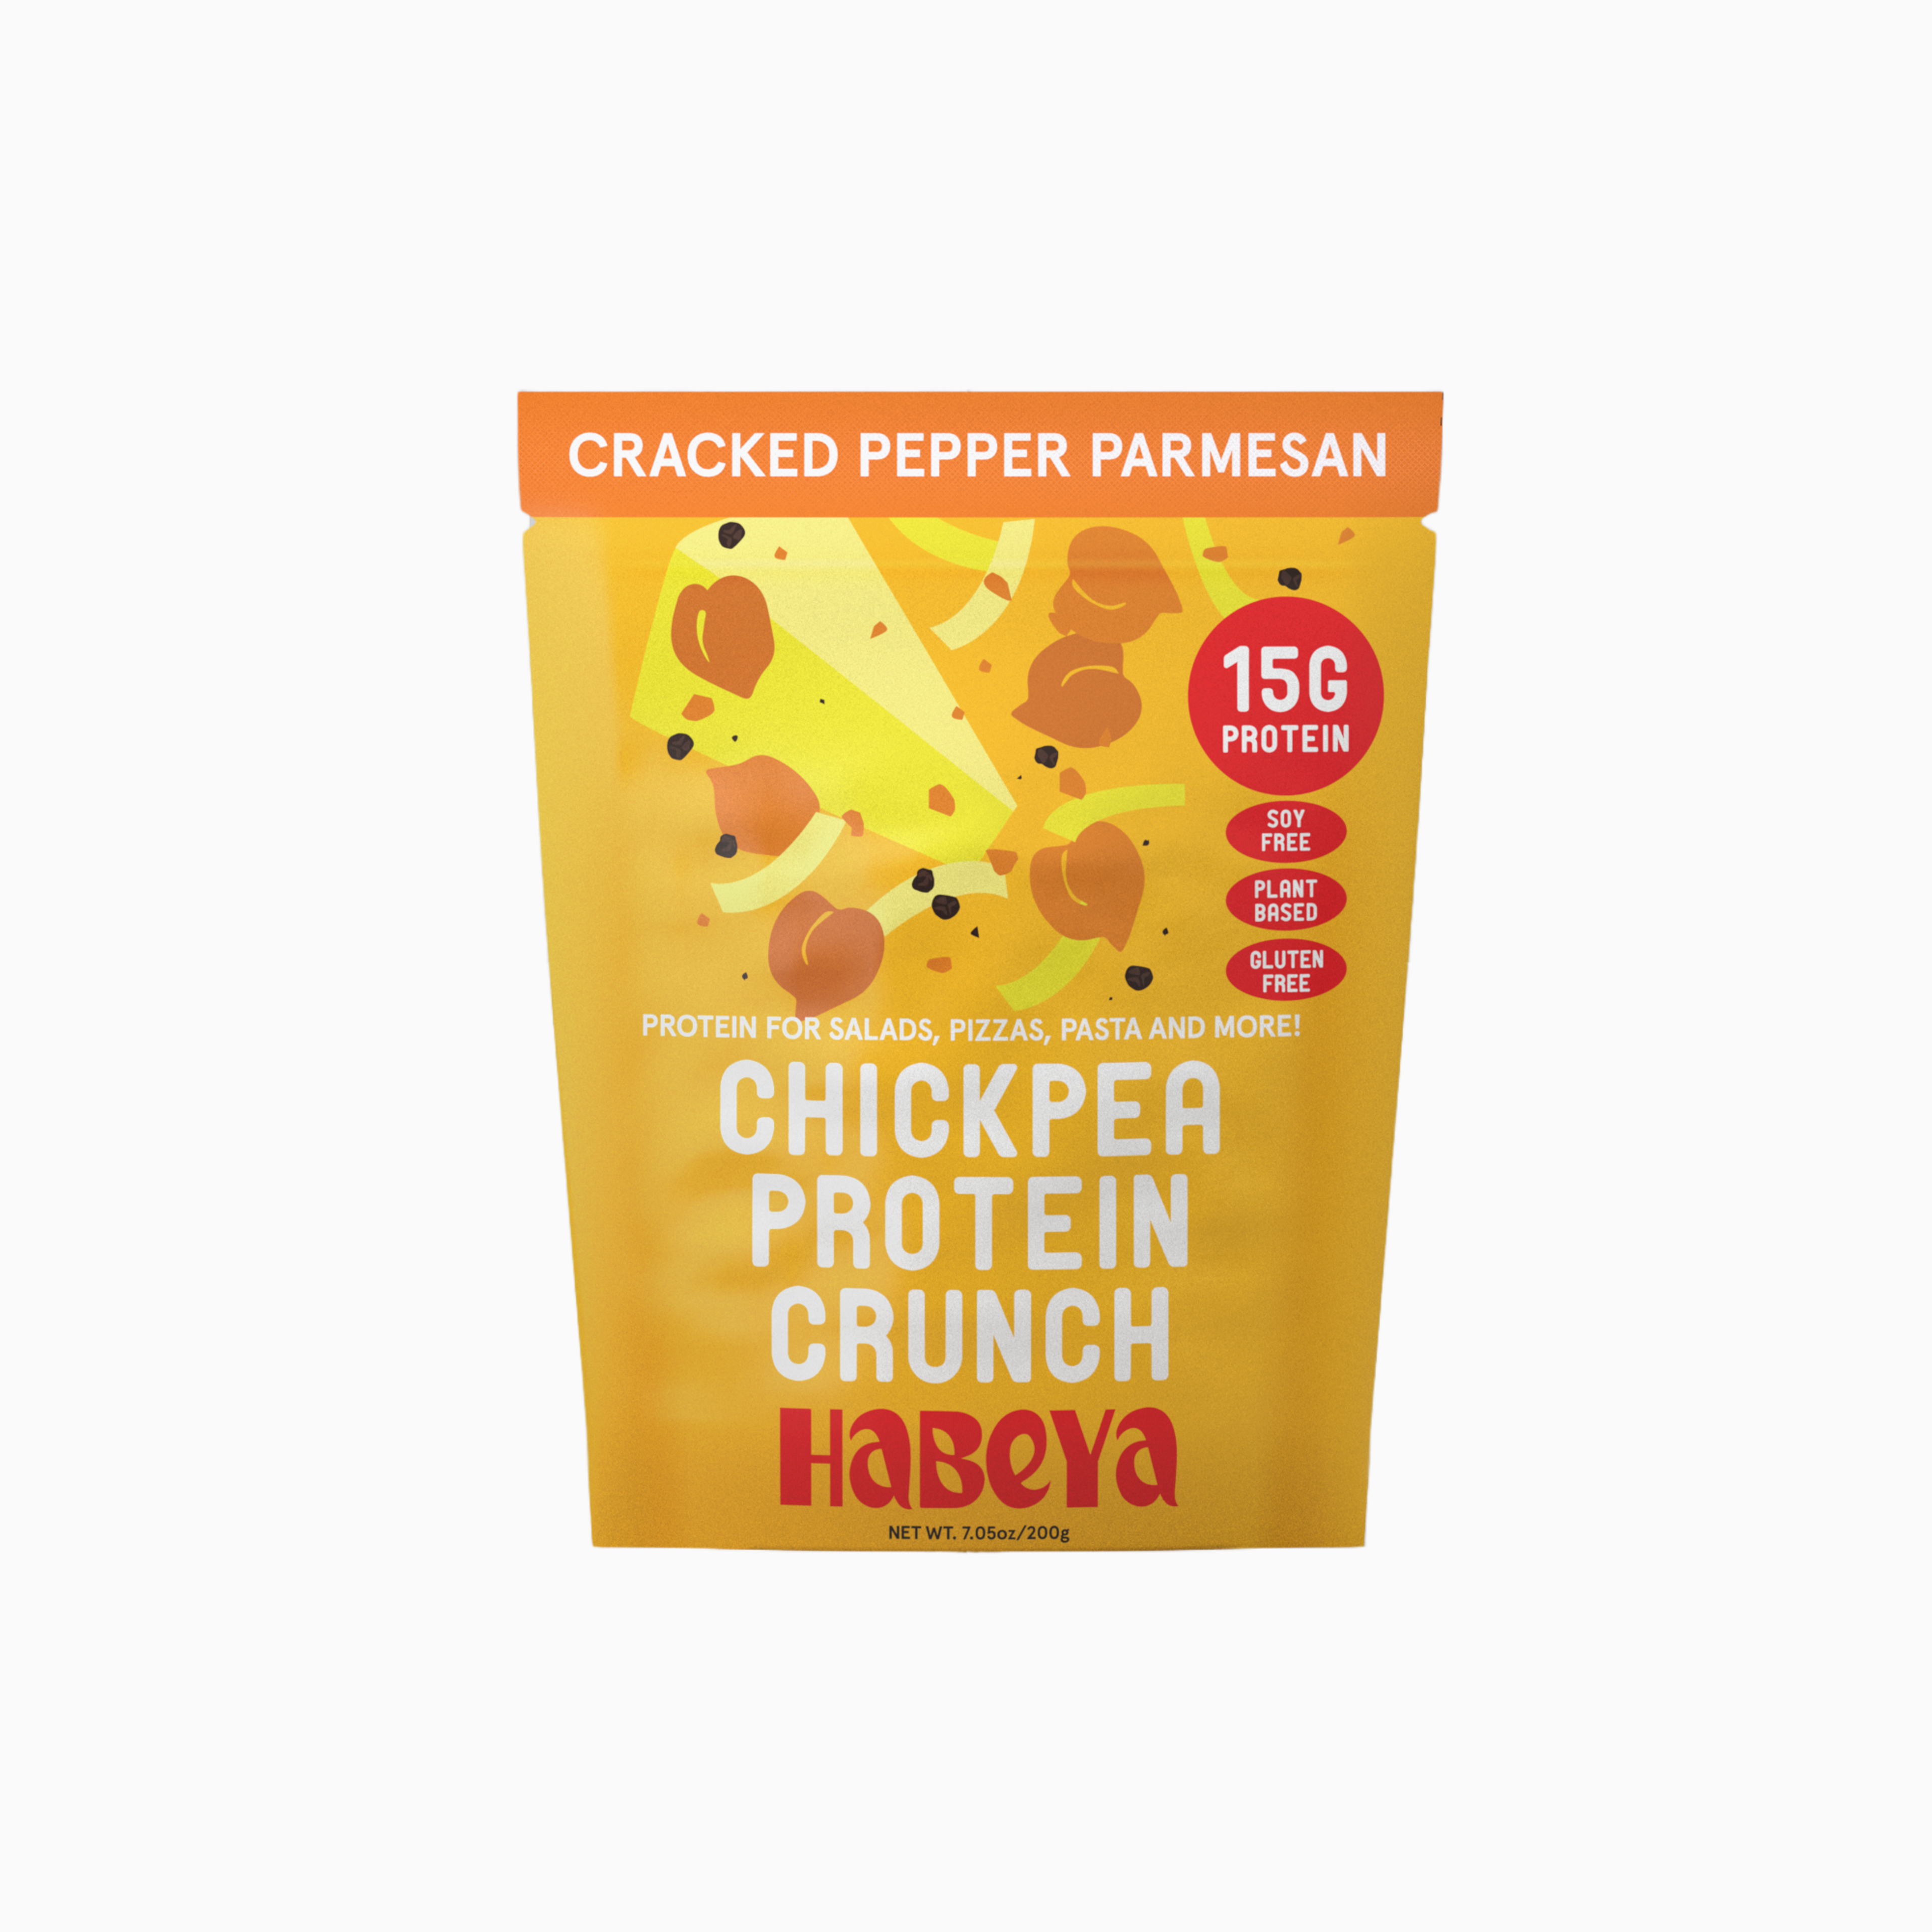 Cracked Pepper Parmesan Chickpea Protein Crunch (3 pack)